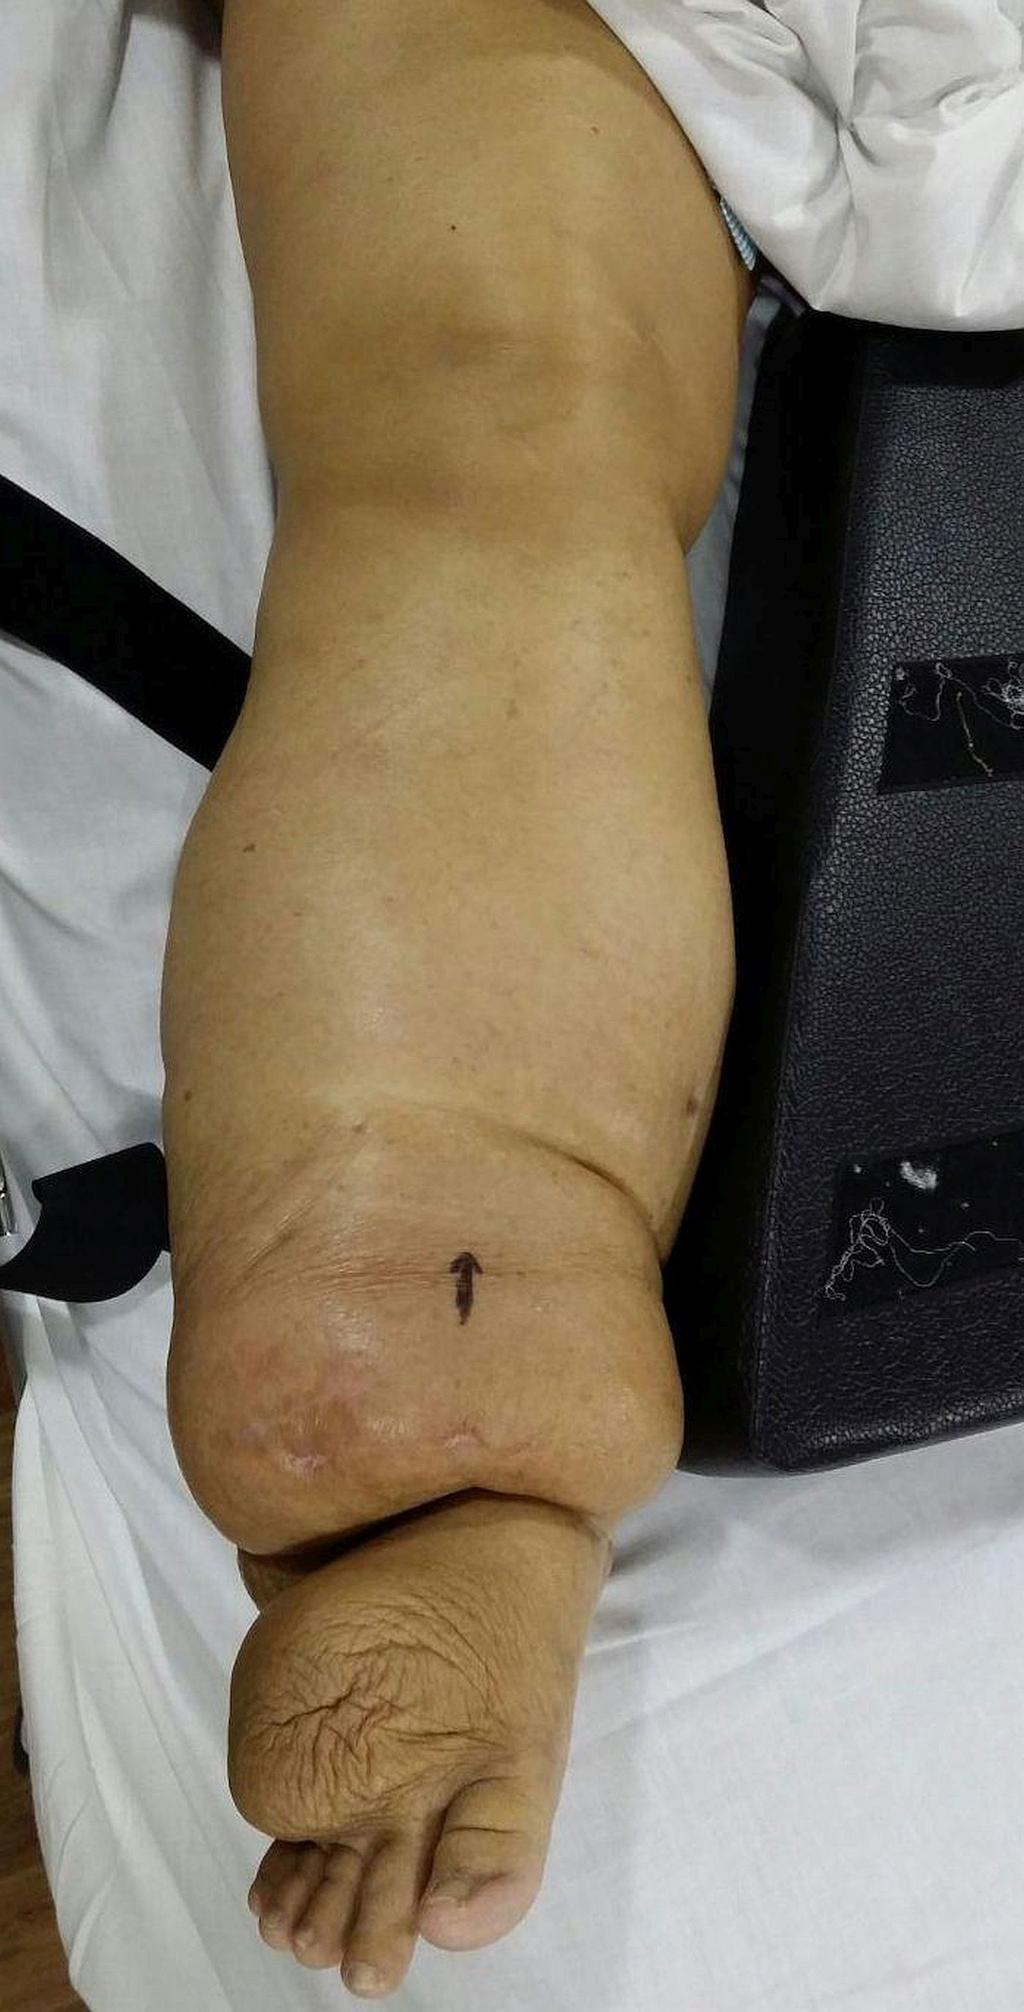 FIGURE 1: Clinical picture showing chronic lymphedema of the